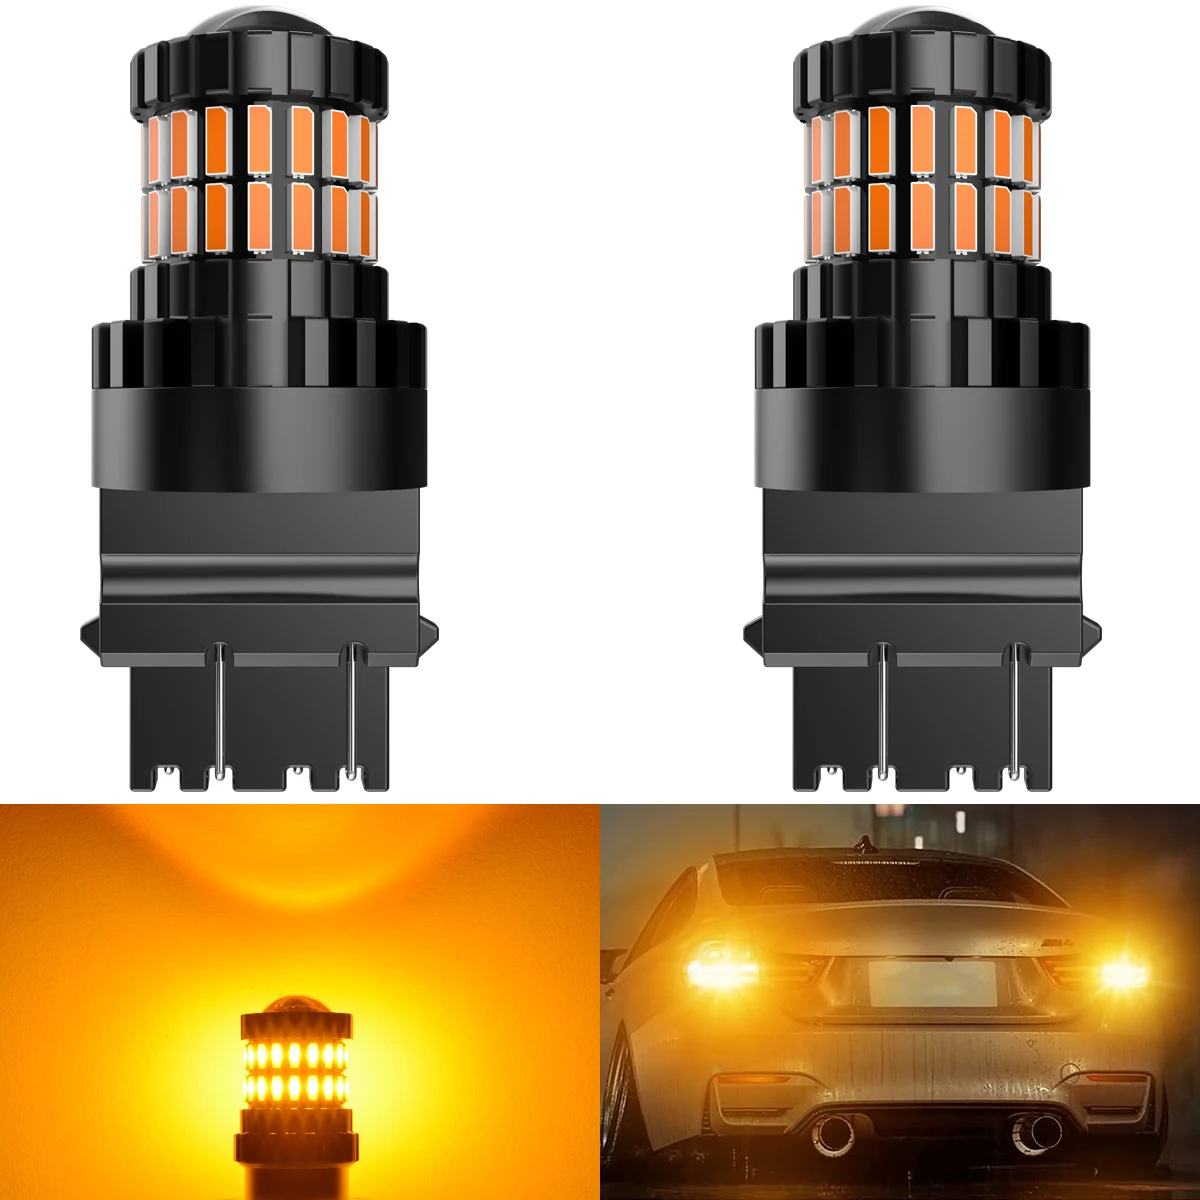 

2Pcs 3157 P27/7W T25 LED Bulbs with 4014SMD Chipsets Turn Signal Light Reverse Backup Tail Brake Lights For 1993 Ford Mustang